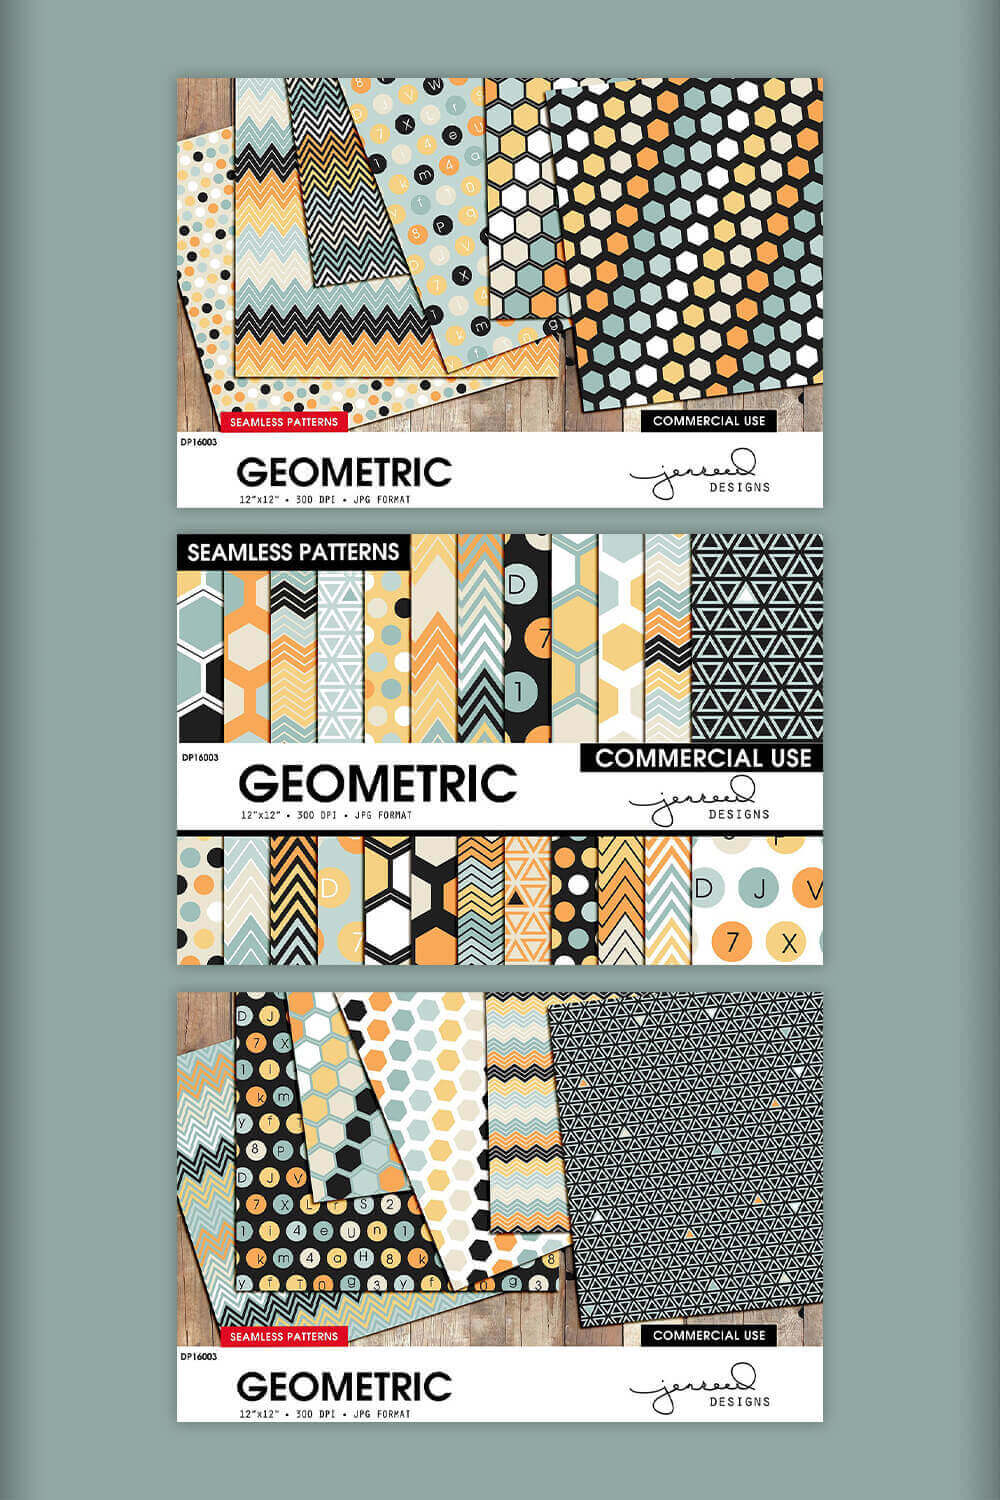 Three Pictures of Geometric Seamless Patterns on Green Background.